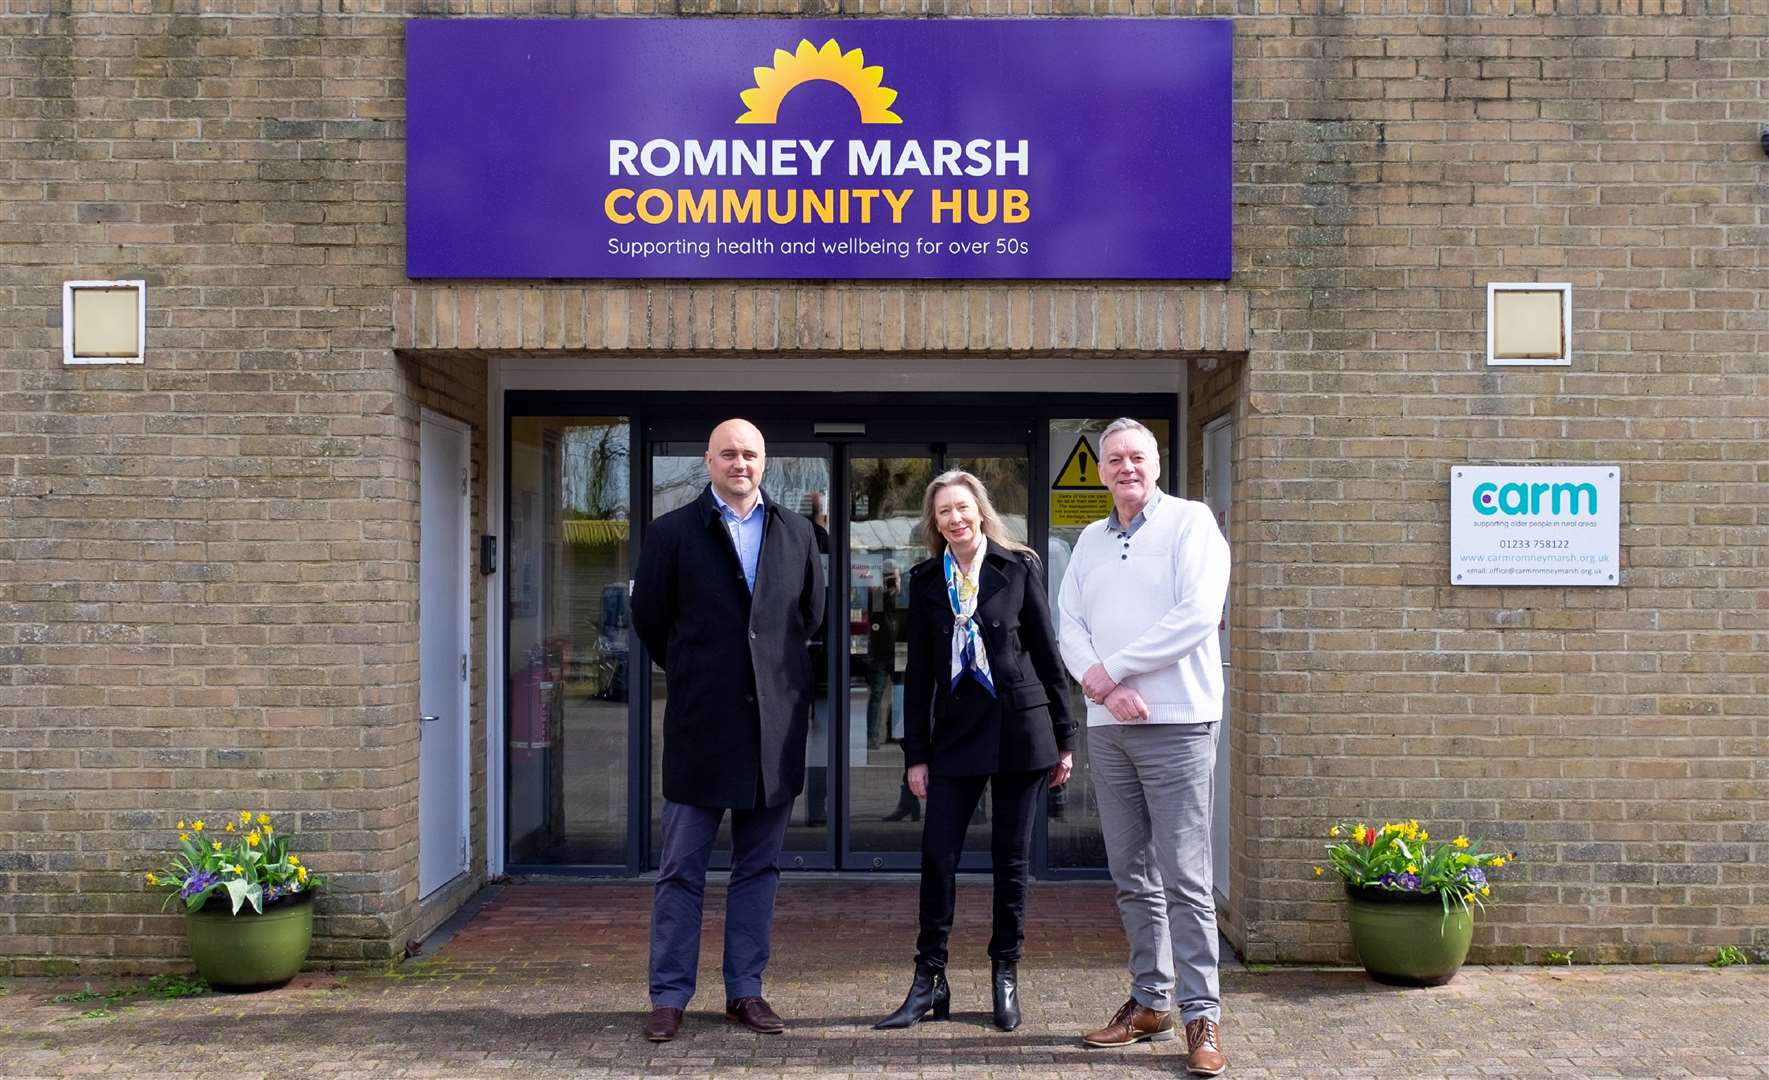 Paul Kitchingman, Councillor Patricia Rolfe and Derek Ruby outside the Romney Marsh Community Hub